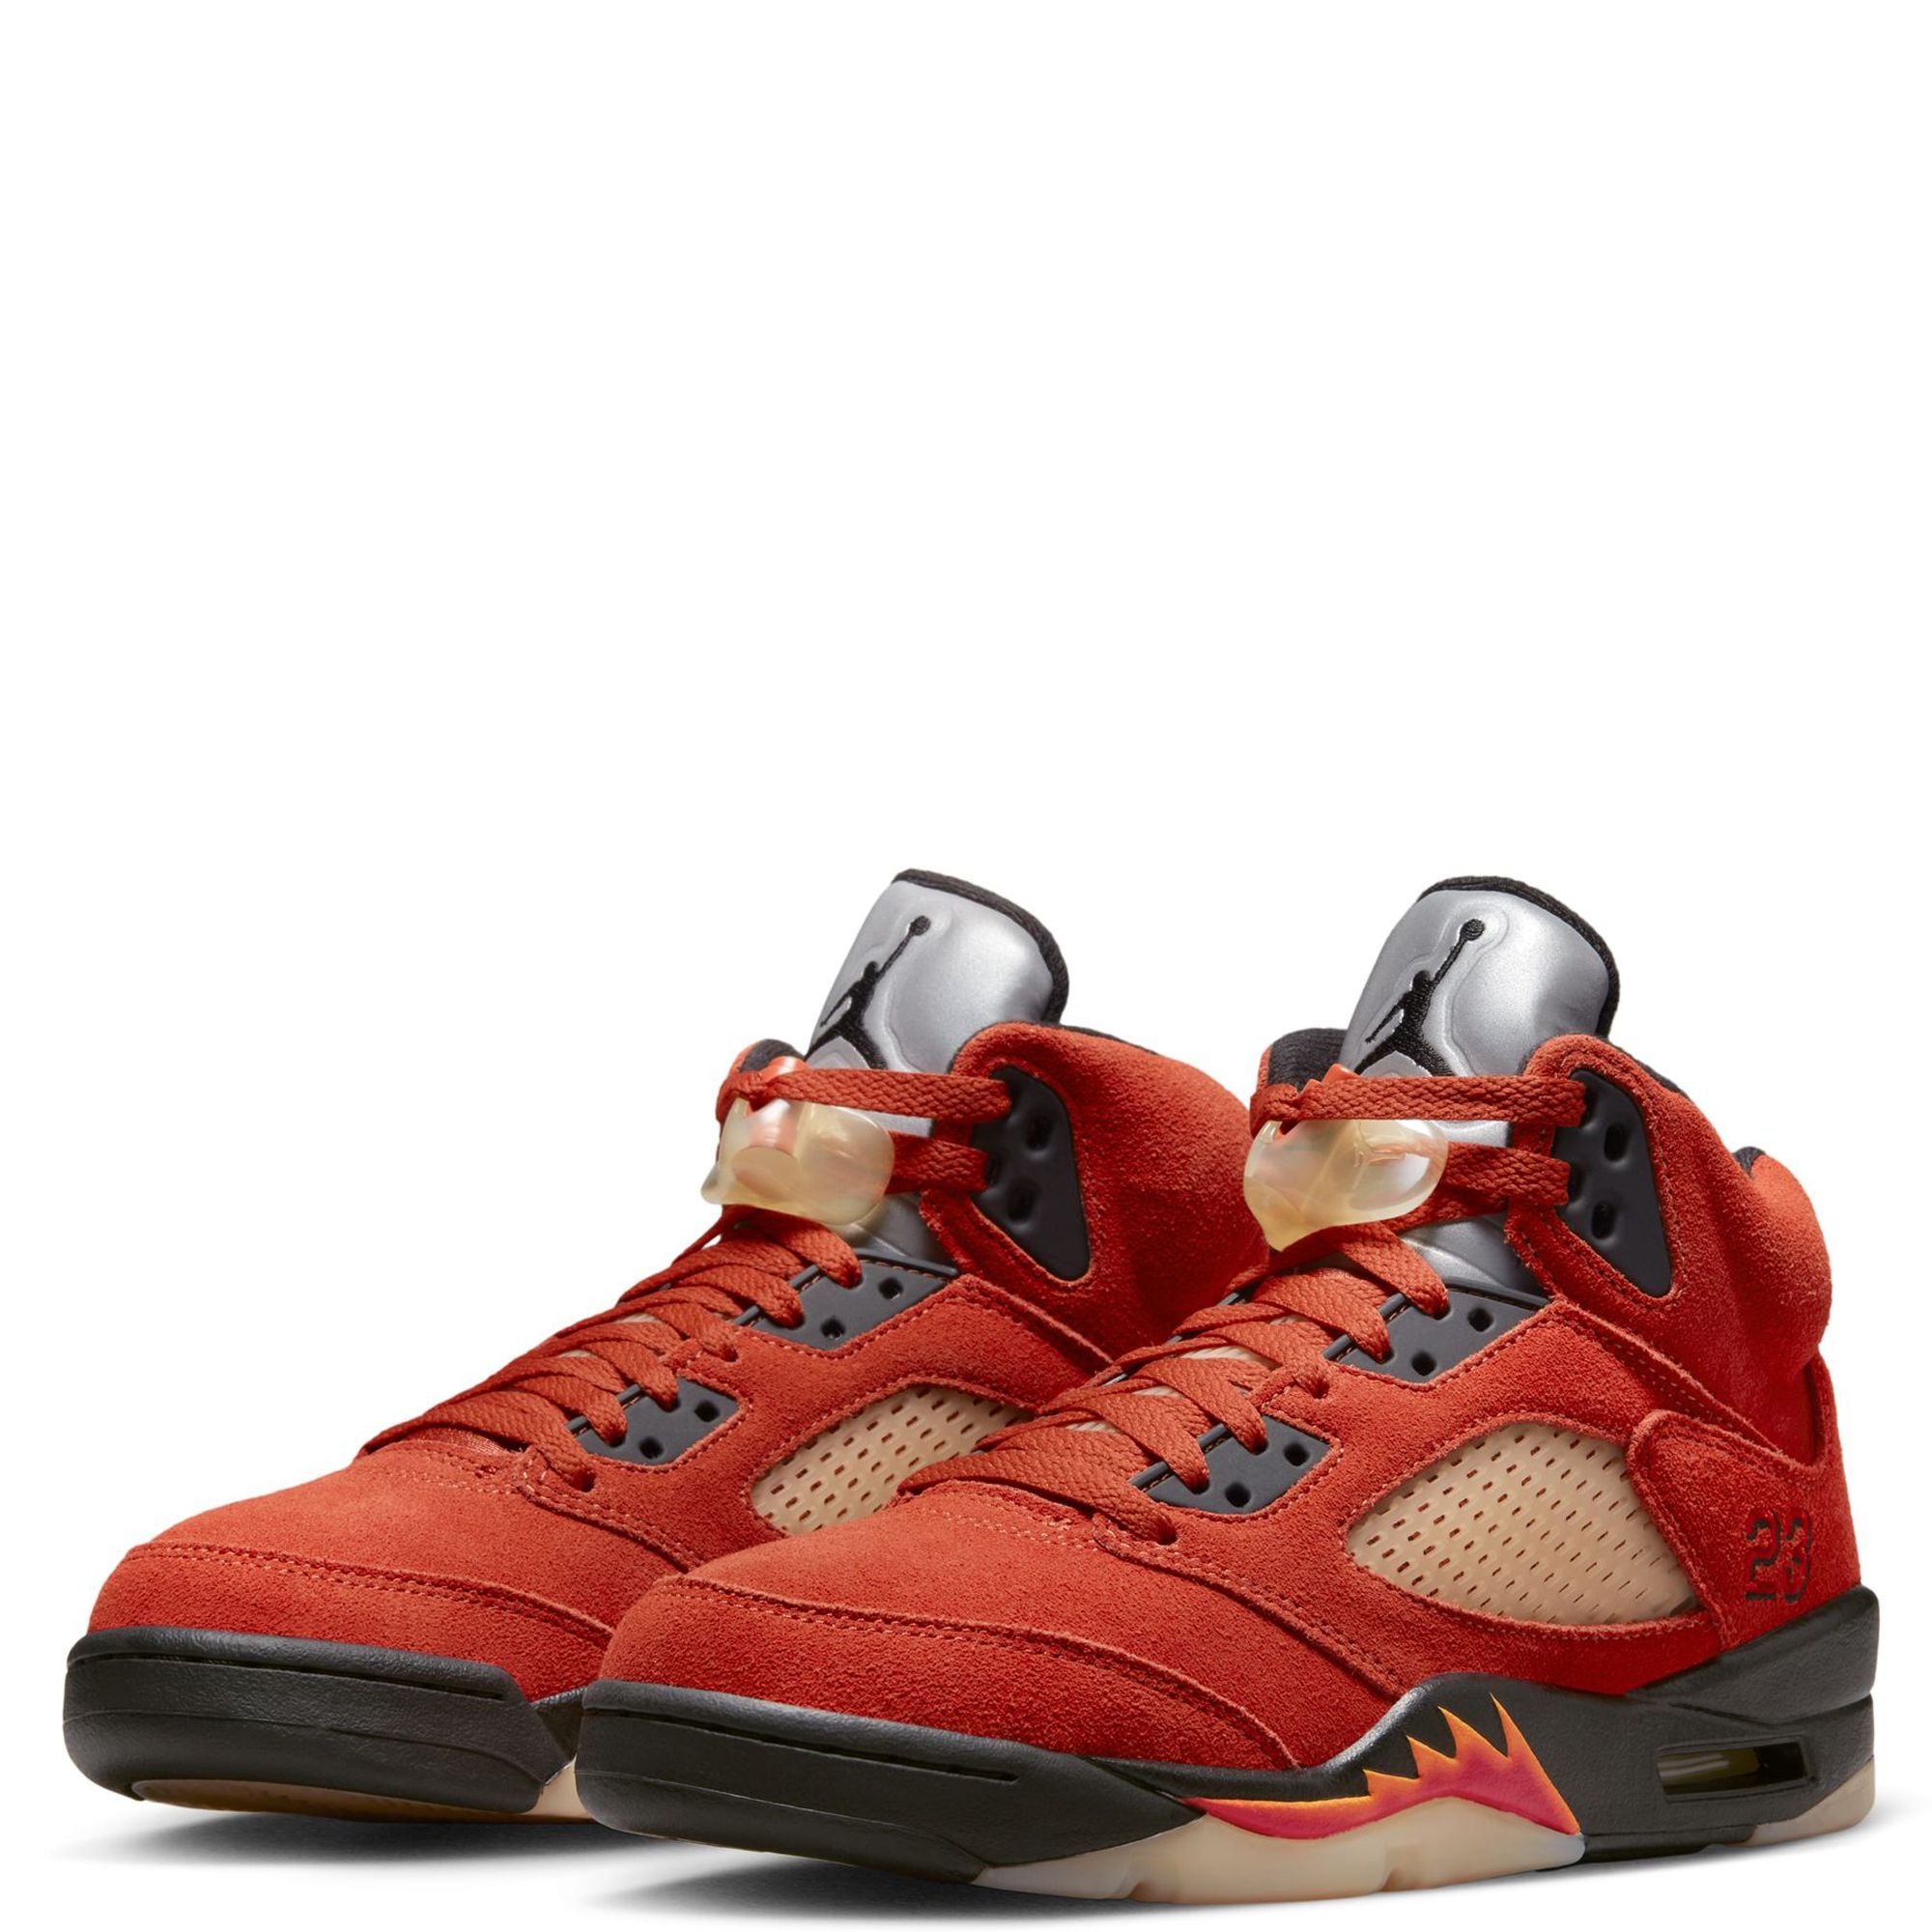 Nike Nike Air Jordan 5 Retro Fire Red  Size 10.5 Available For Immediate  Sale At Sotheby's